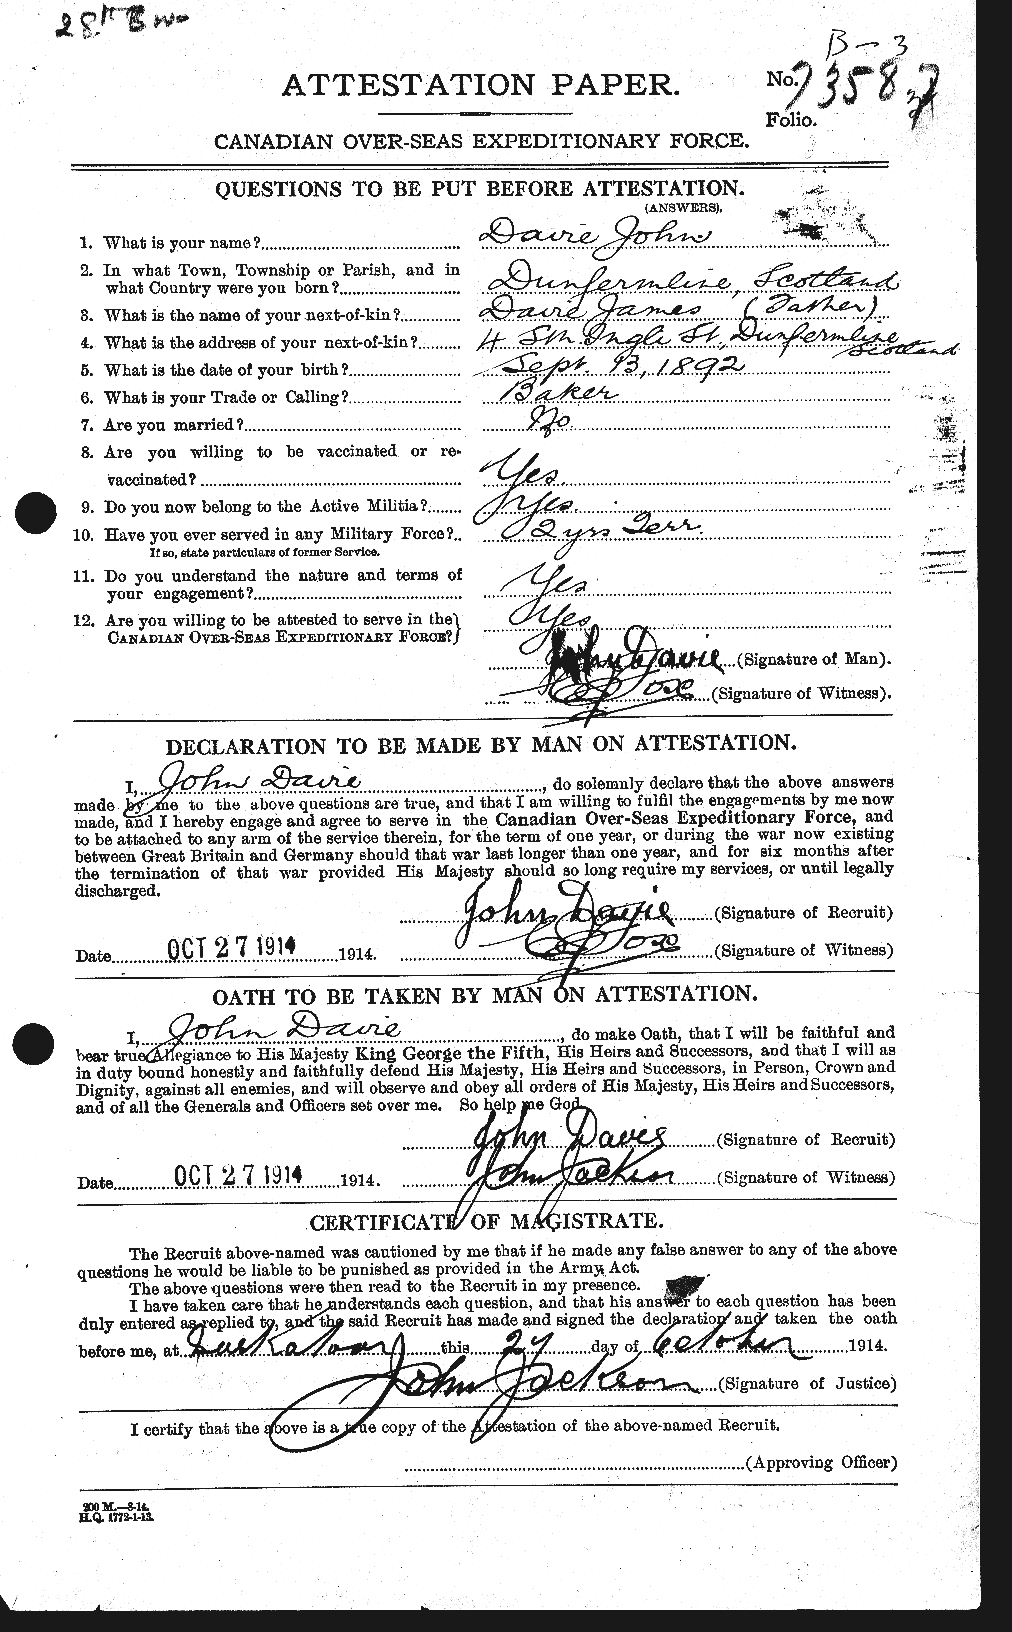 Personnel Records of the First World War - CEF 278839a